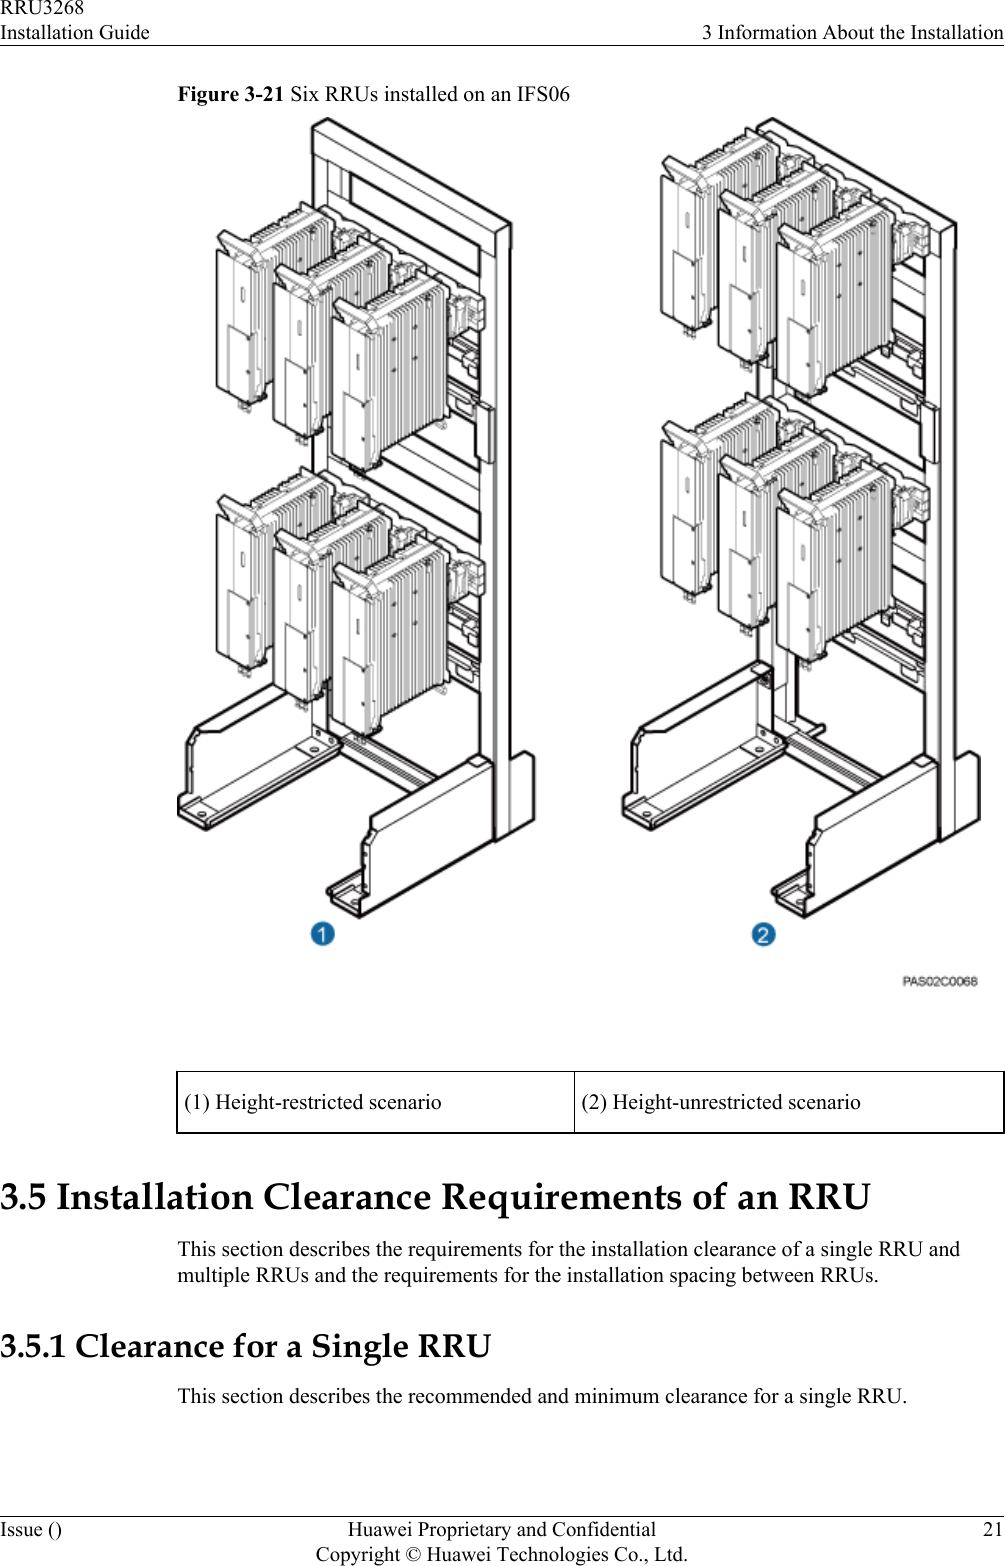 Figure 3-21 Six RRUs installed on an IFS06 (1) Height-restricted scenario (2) Height-unrestricted scenario3.5 Installation Clearance Requirements of an RRUThis section describes the requirements for the installation clearance of a single RRU andmultiple RRUs and the requirements for the installation spacing between RRUs.3.5.1 Clearance for a Single RRUThis section describes the recommended and minimum clearance for a single RRU.RRU3268Installation Guide 3 Information About the InstallationIssue () Huawei Proprietary and ConfidentialCopyright © Huawei Technologies Co., Ltd.21